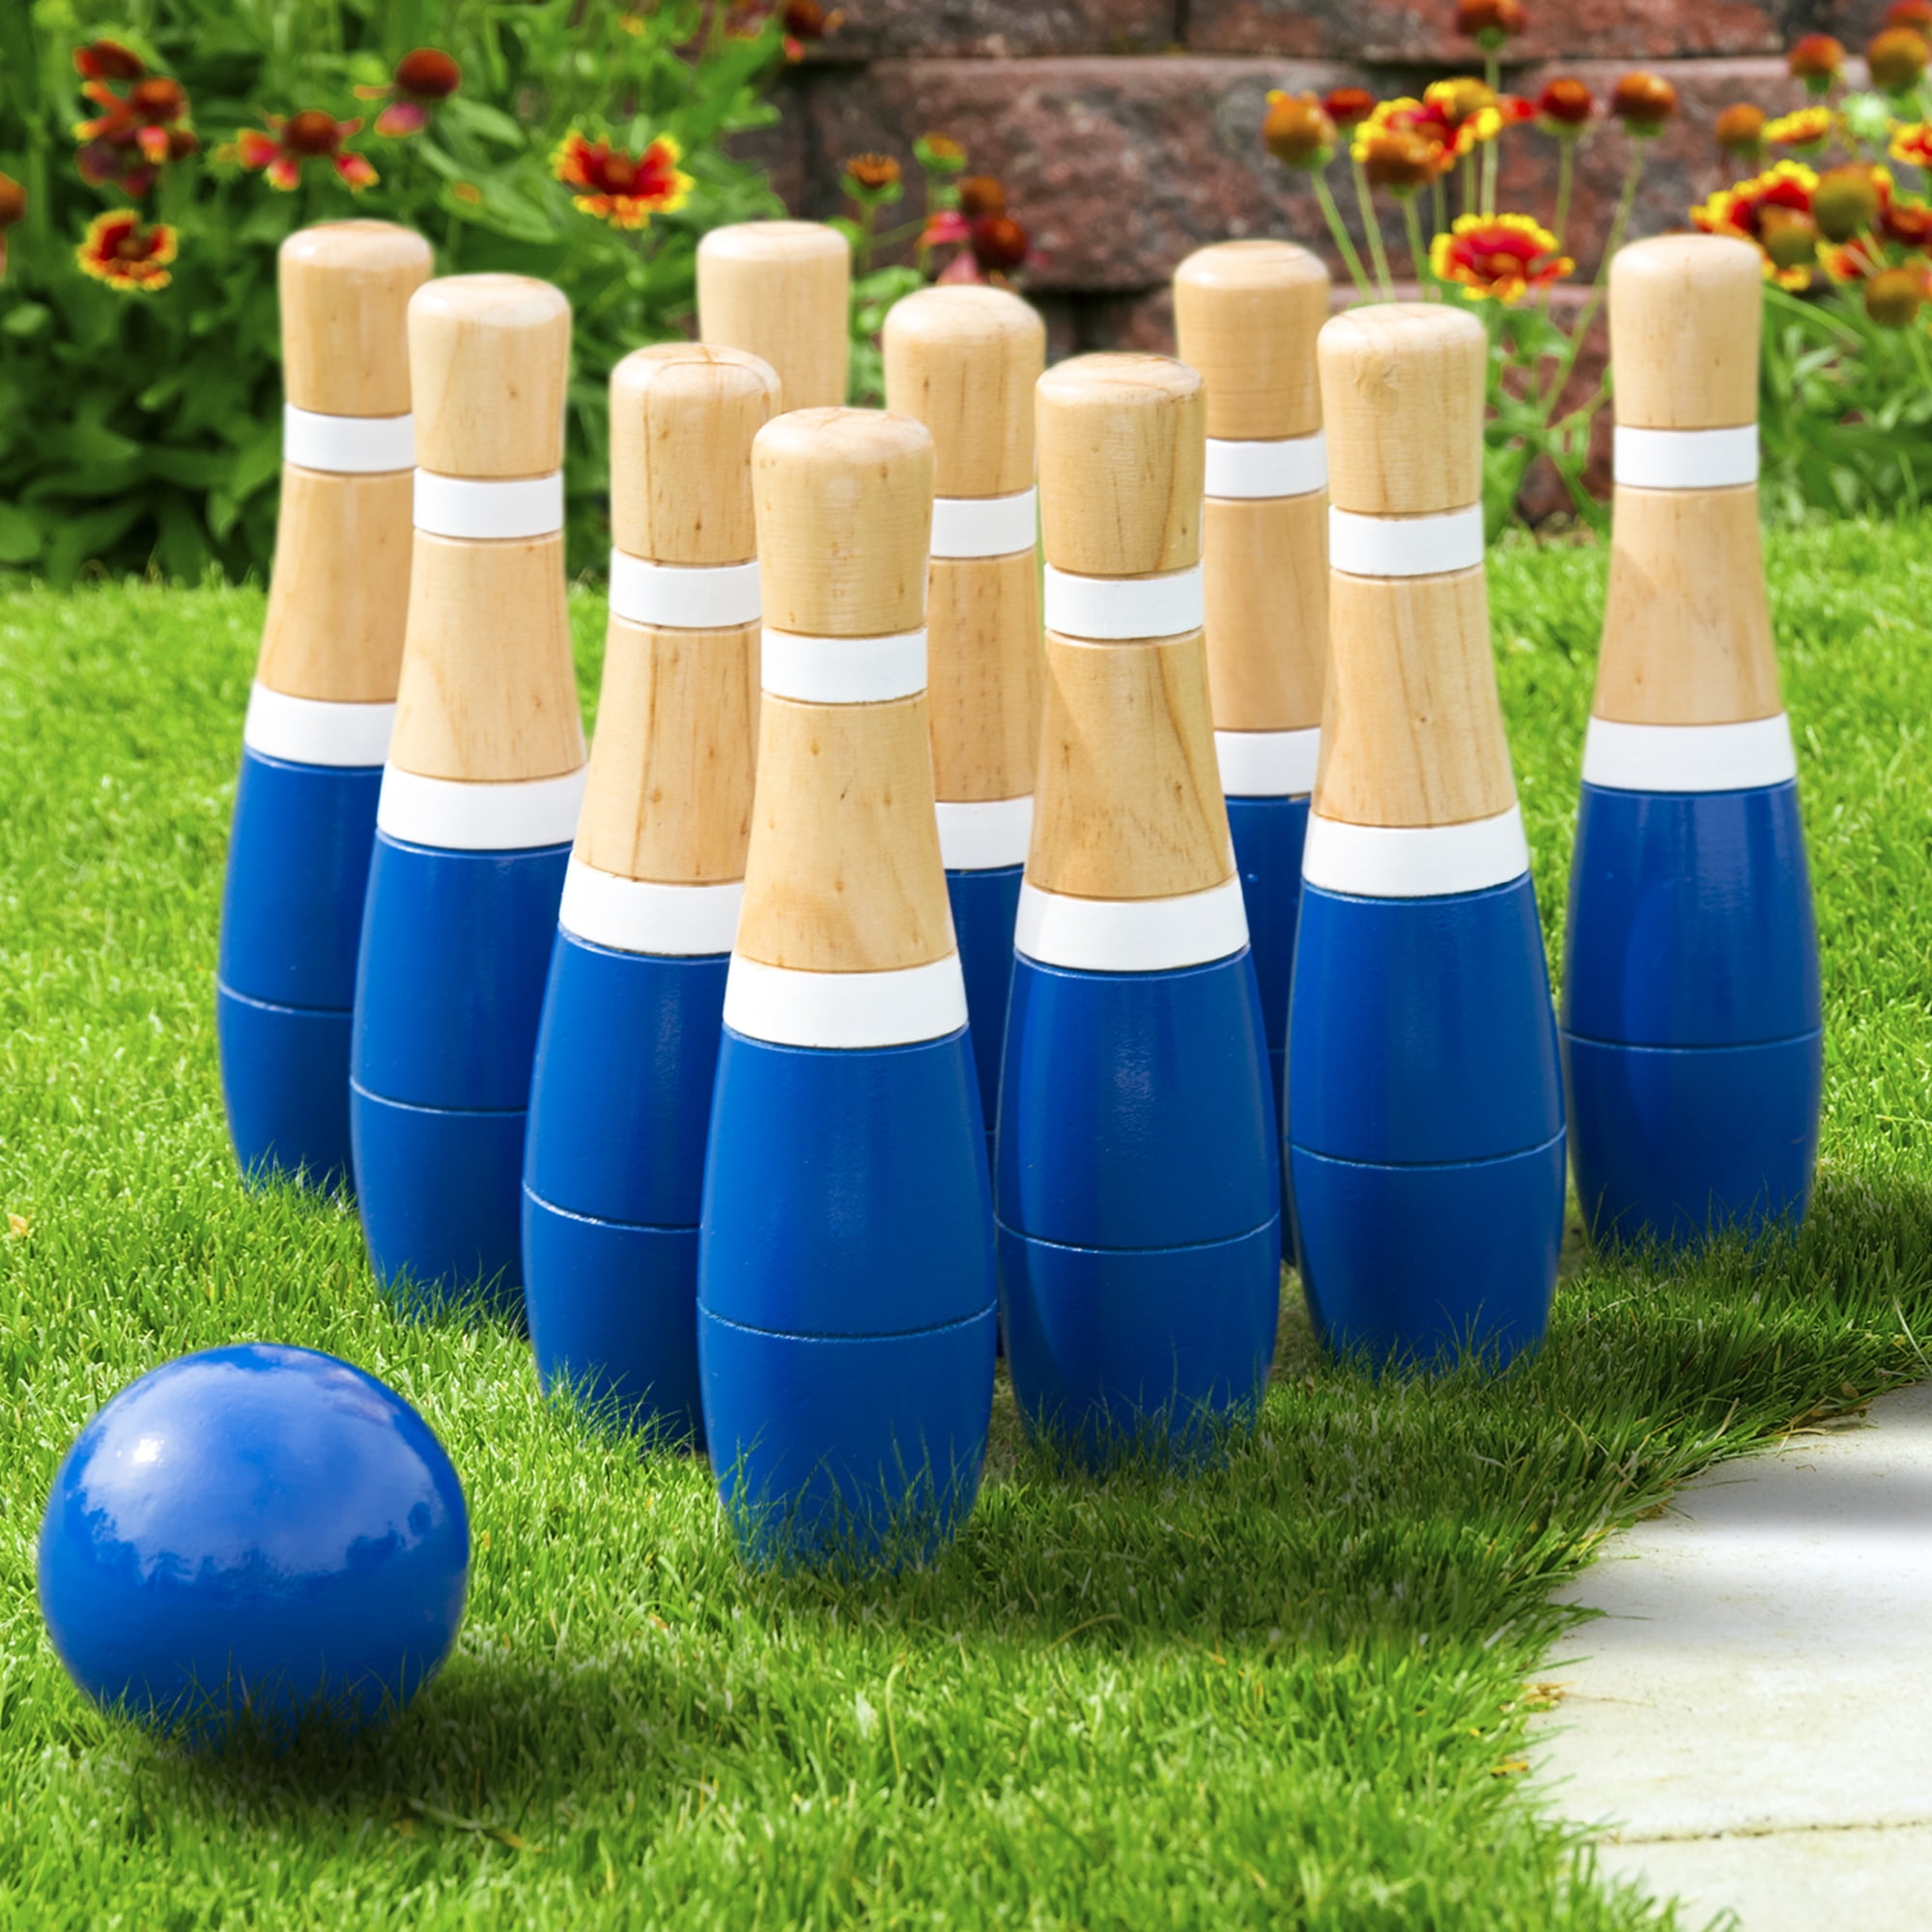 Lawn Bowling Game/Skittle Ball- Indoor and Outdoor Fun for Toddlers, Kids, Adults